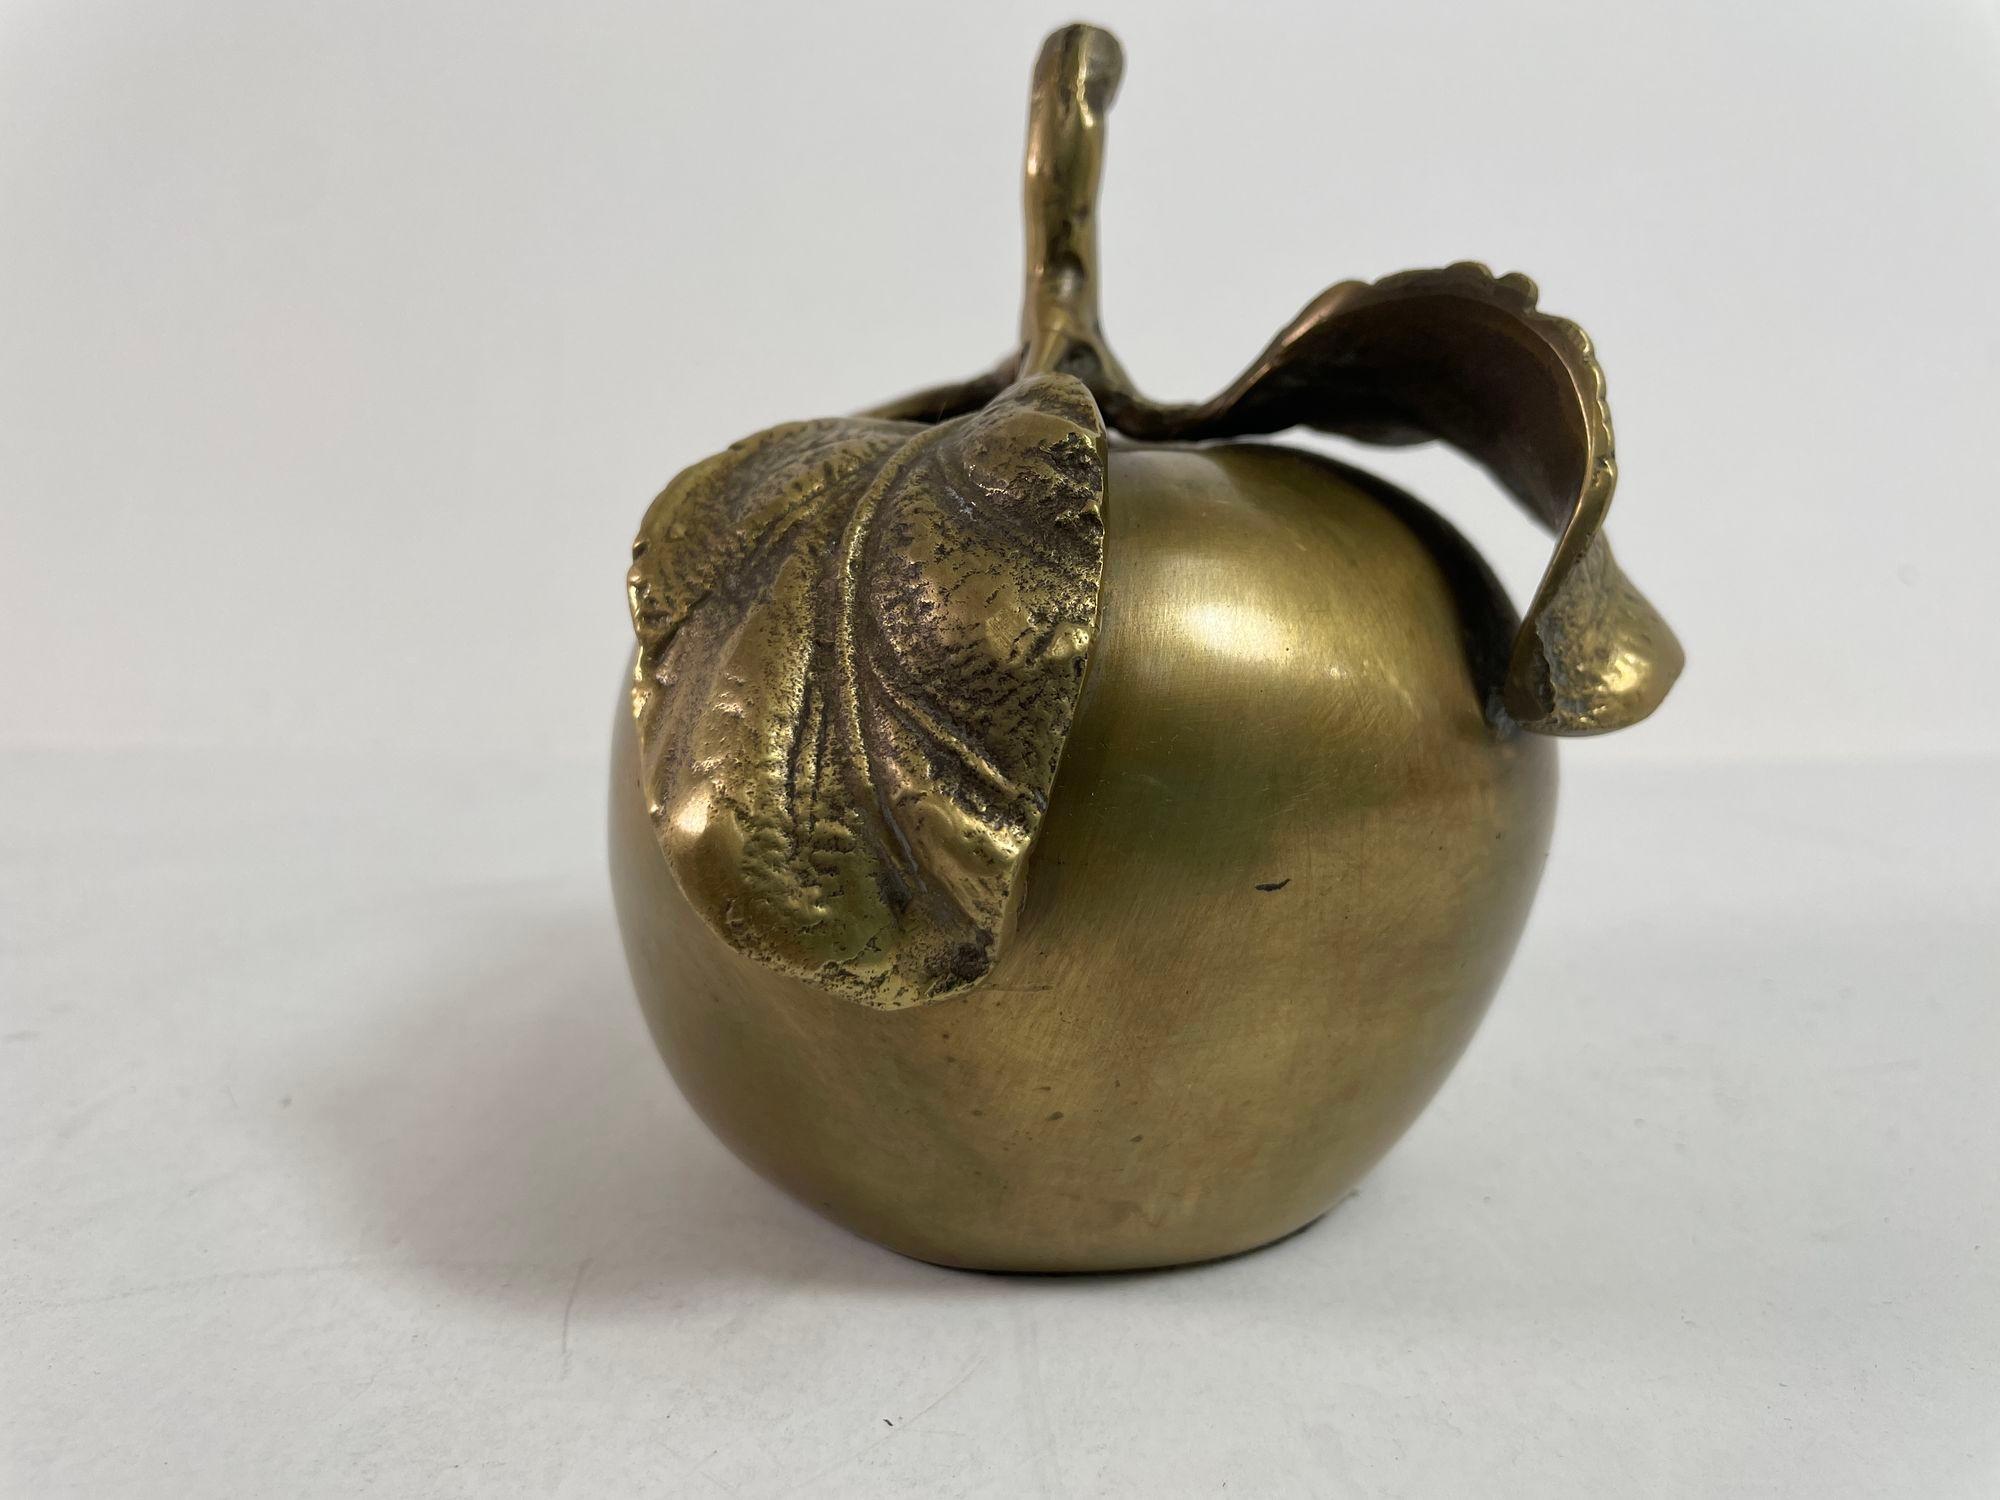 Hand-Crafted Vintage Brass Apple Sculpture Paperweight For Sale